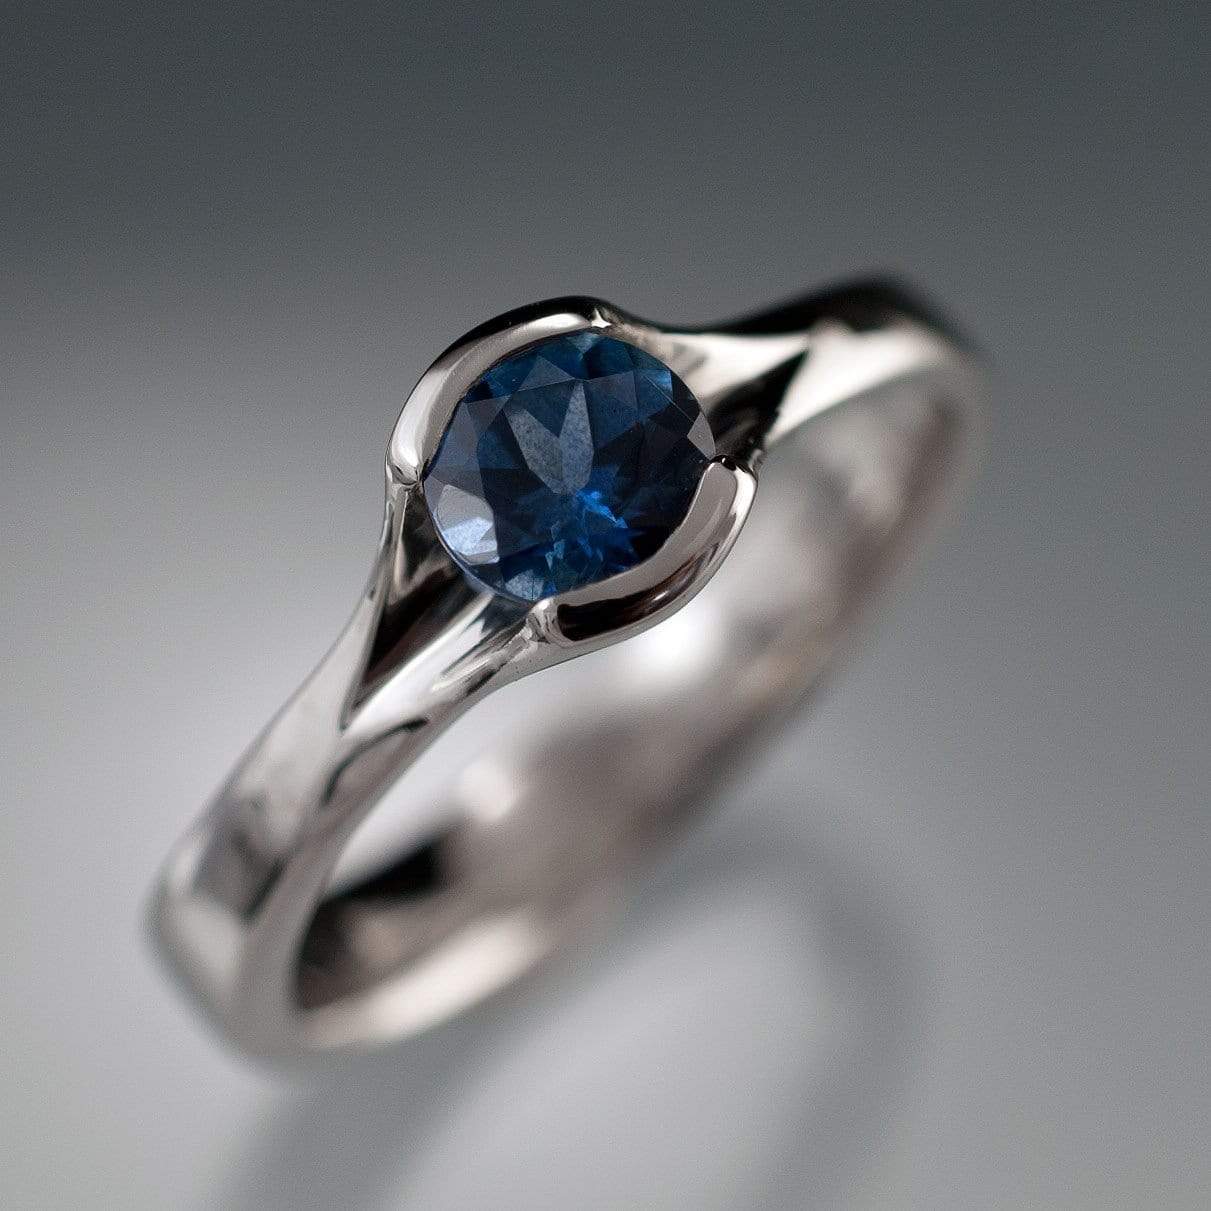 Round Fair Trade Blue Sapphire Fold Solitaire Engagement Ring 5mm Blue Sapphire #B2 or #B3 / 14kPD White Gold Ring by Nodeform